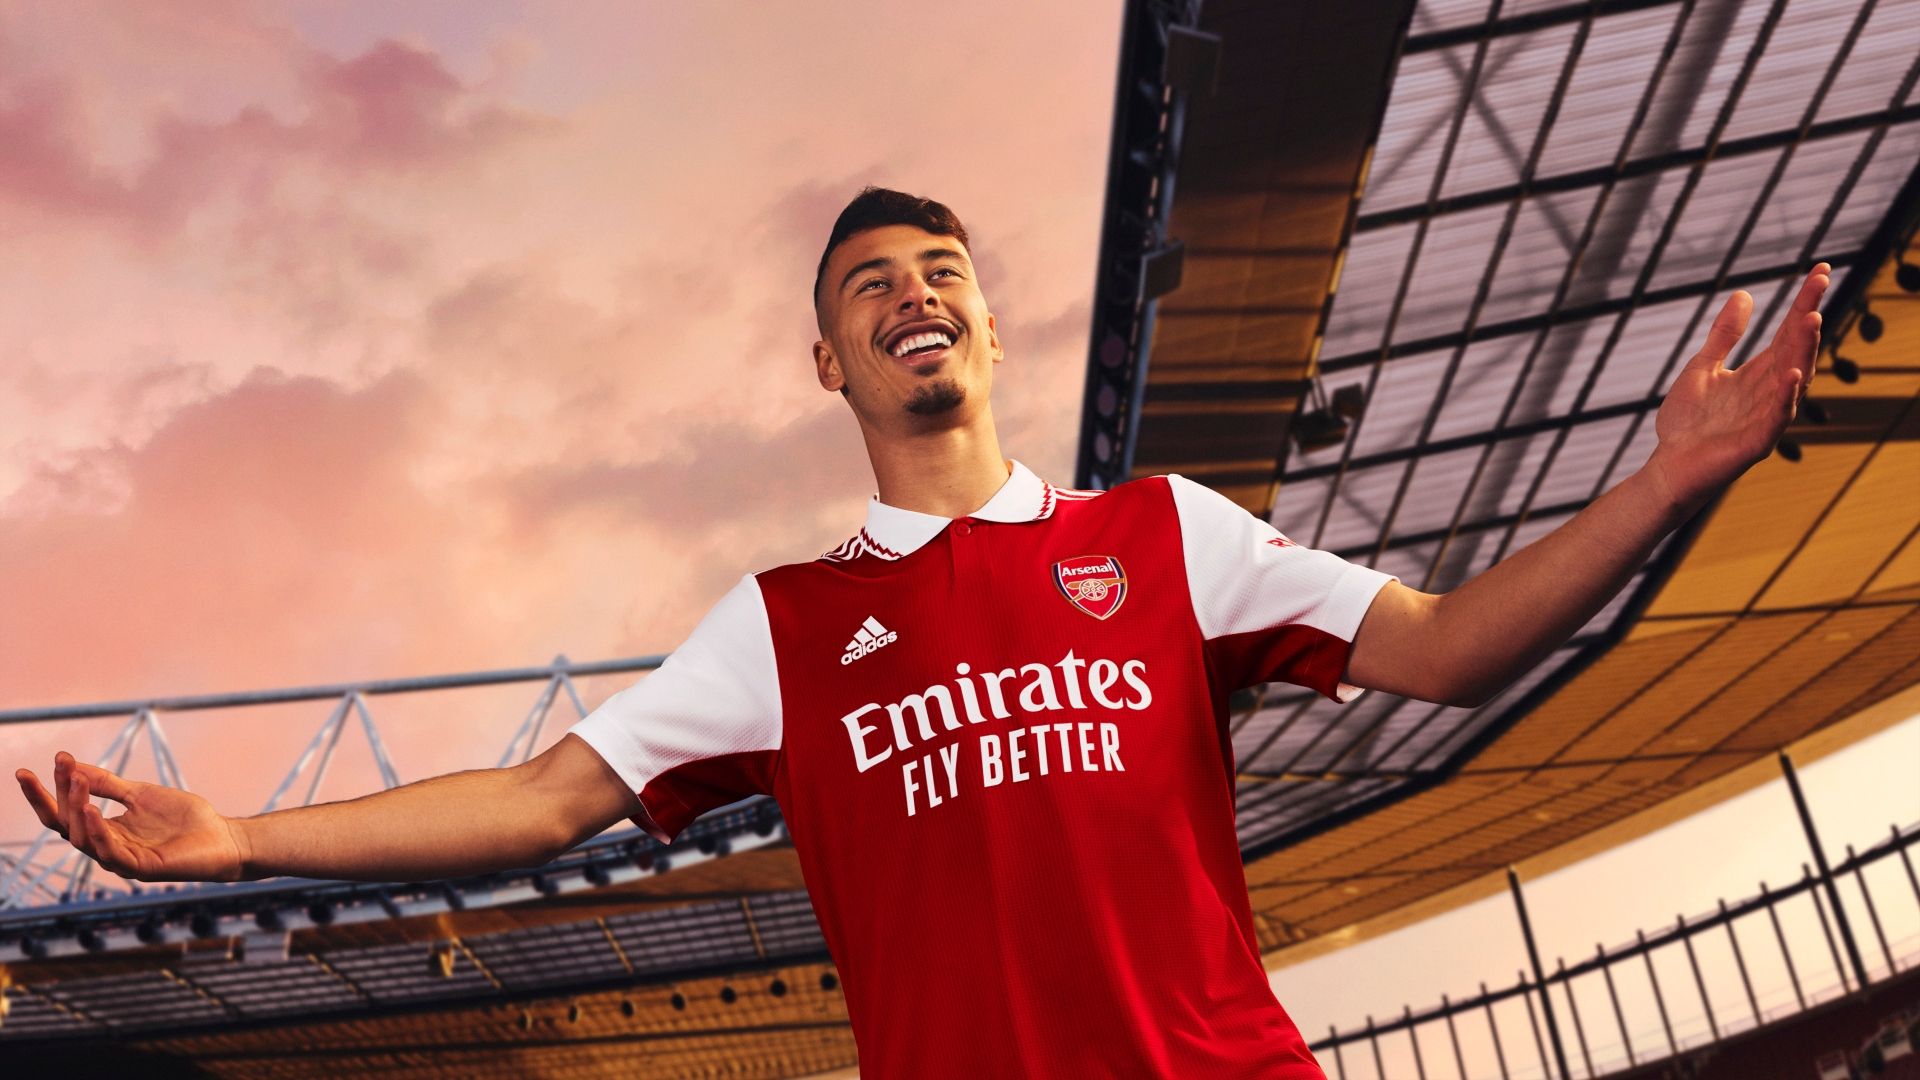 Arsenal unveil a new home kit and will wear a collar for the first time